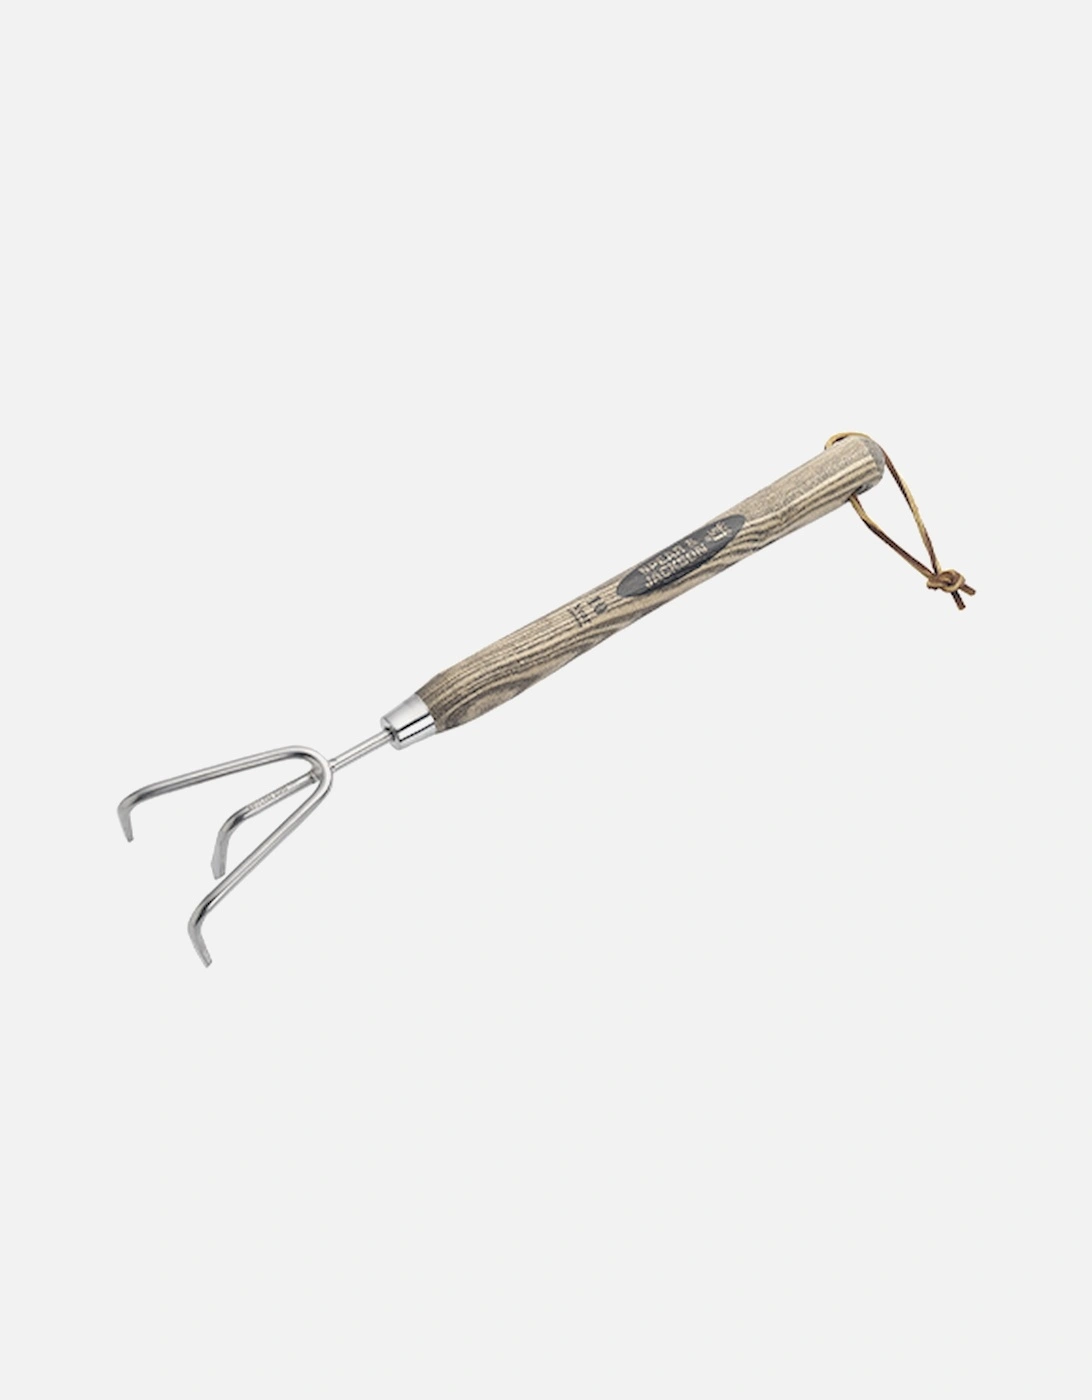 Spear & Jackson Traditional Stainless Steel Long Handled 3 Prong Cultivator 12'', 2 of 1